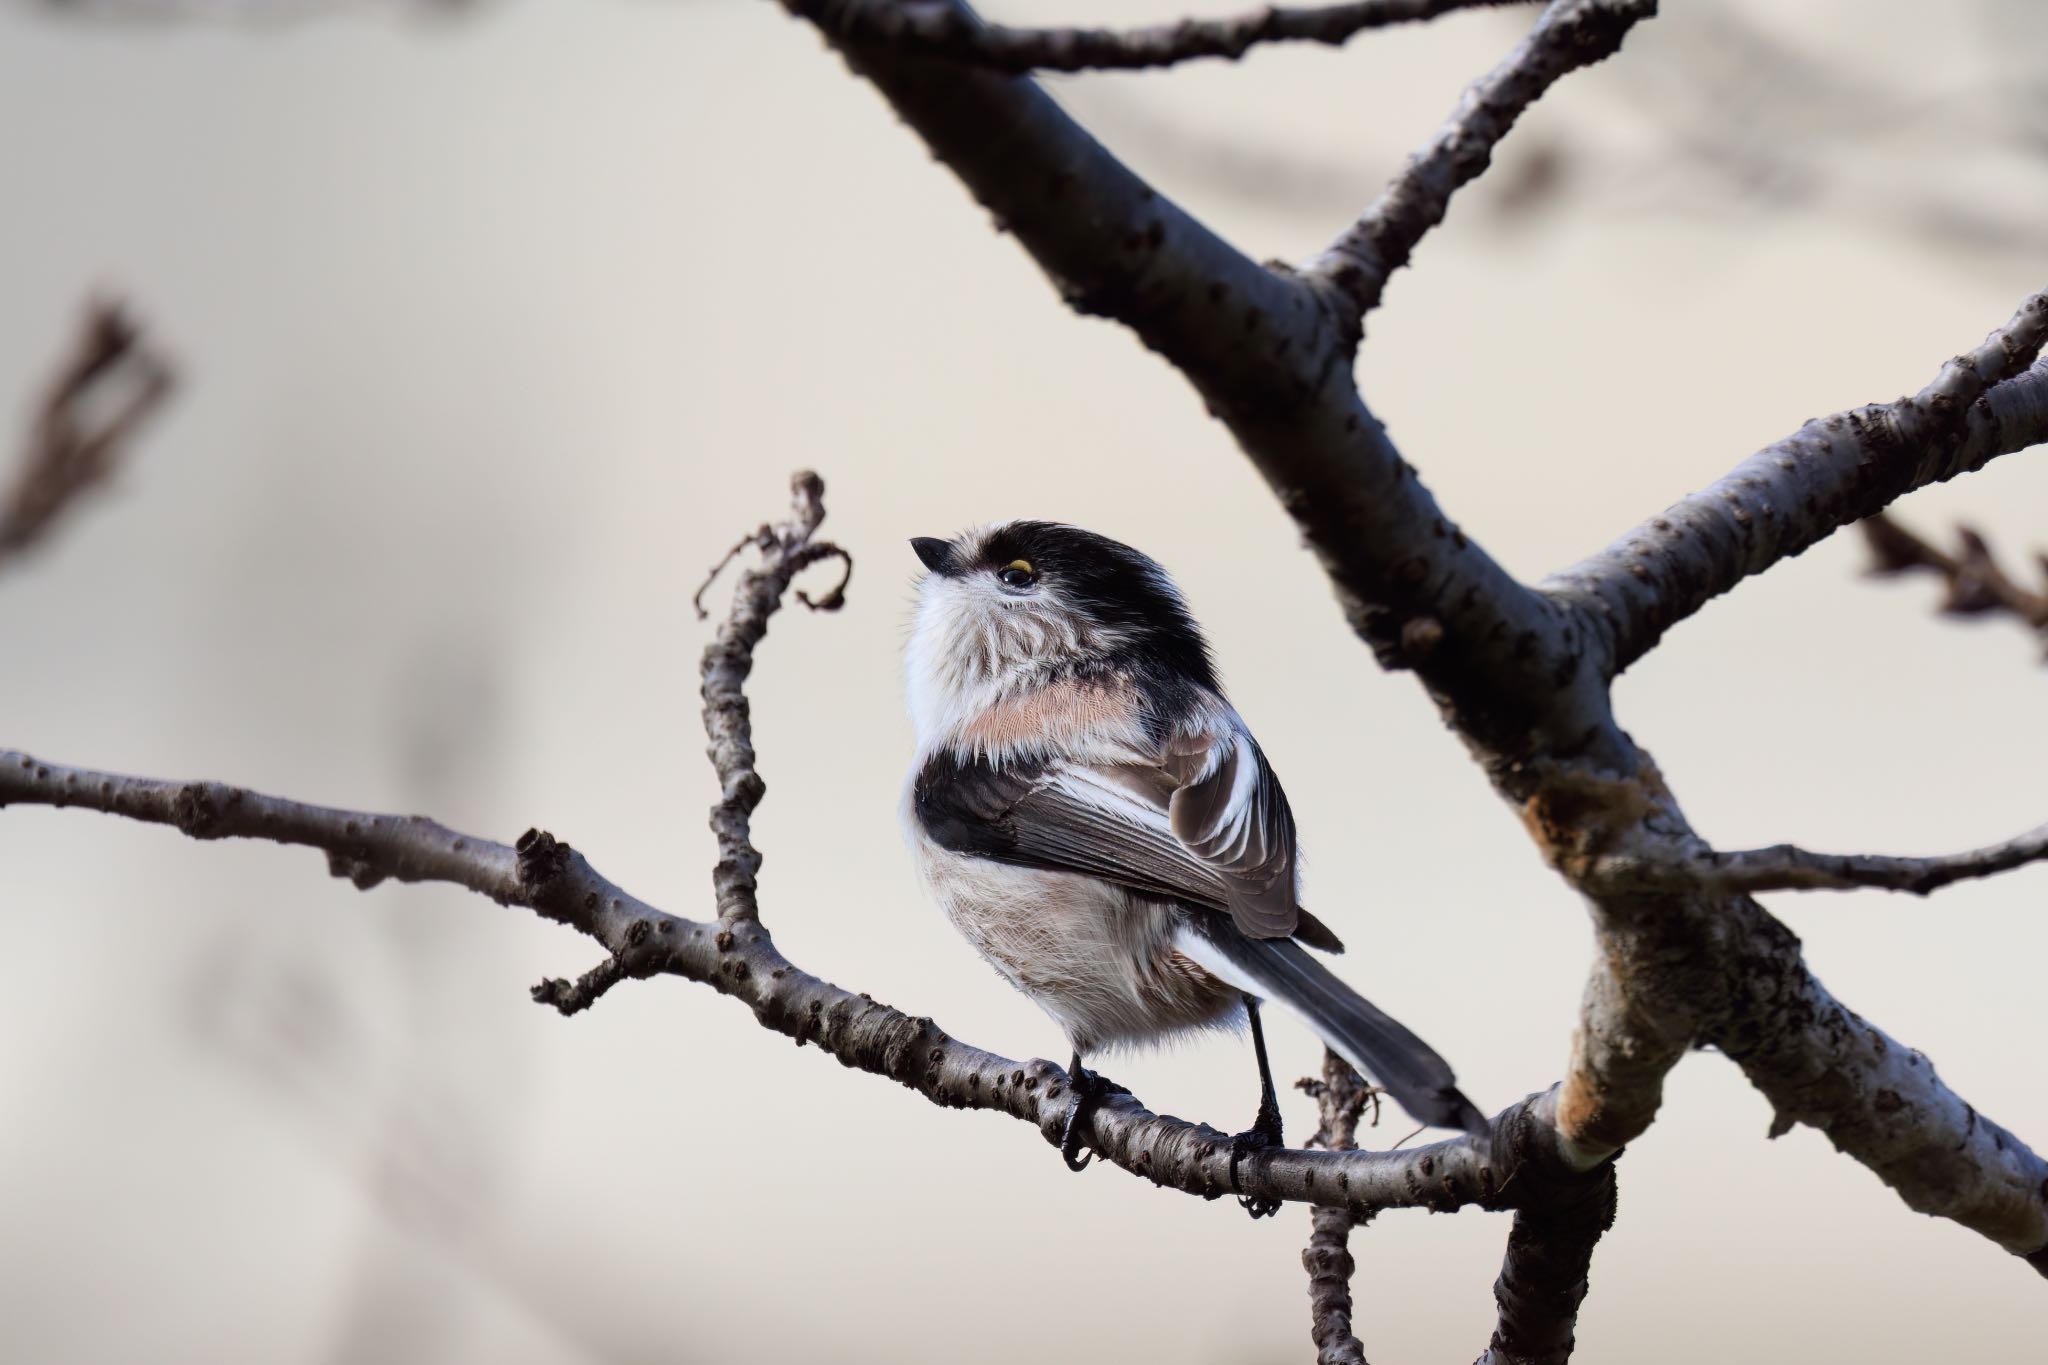 Photo of Long-tailed Tit at 各務原市境川 by アカウント5104